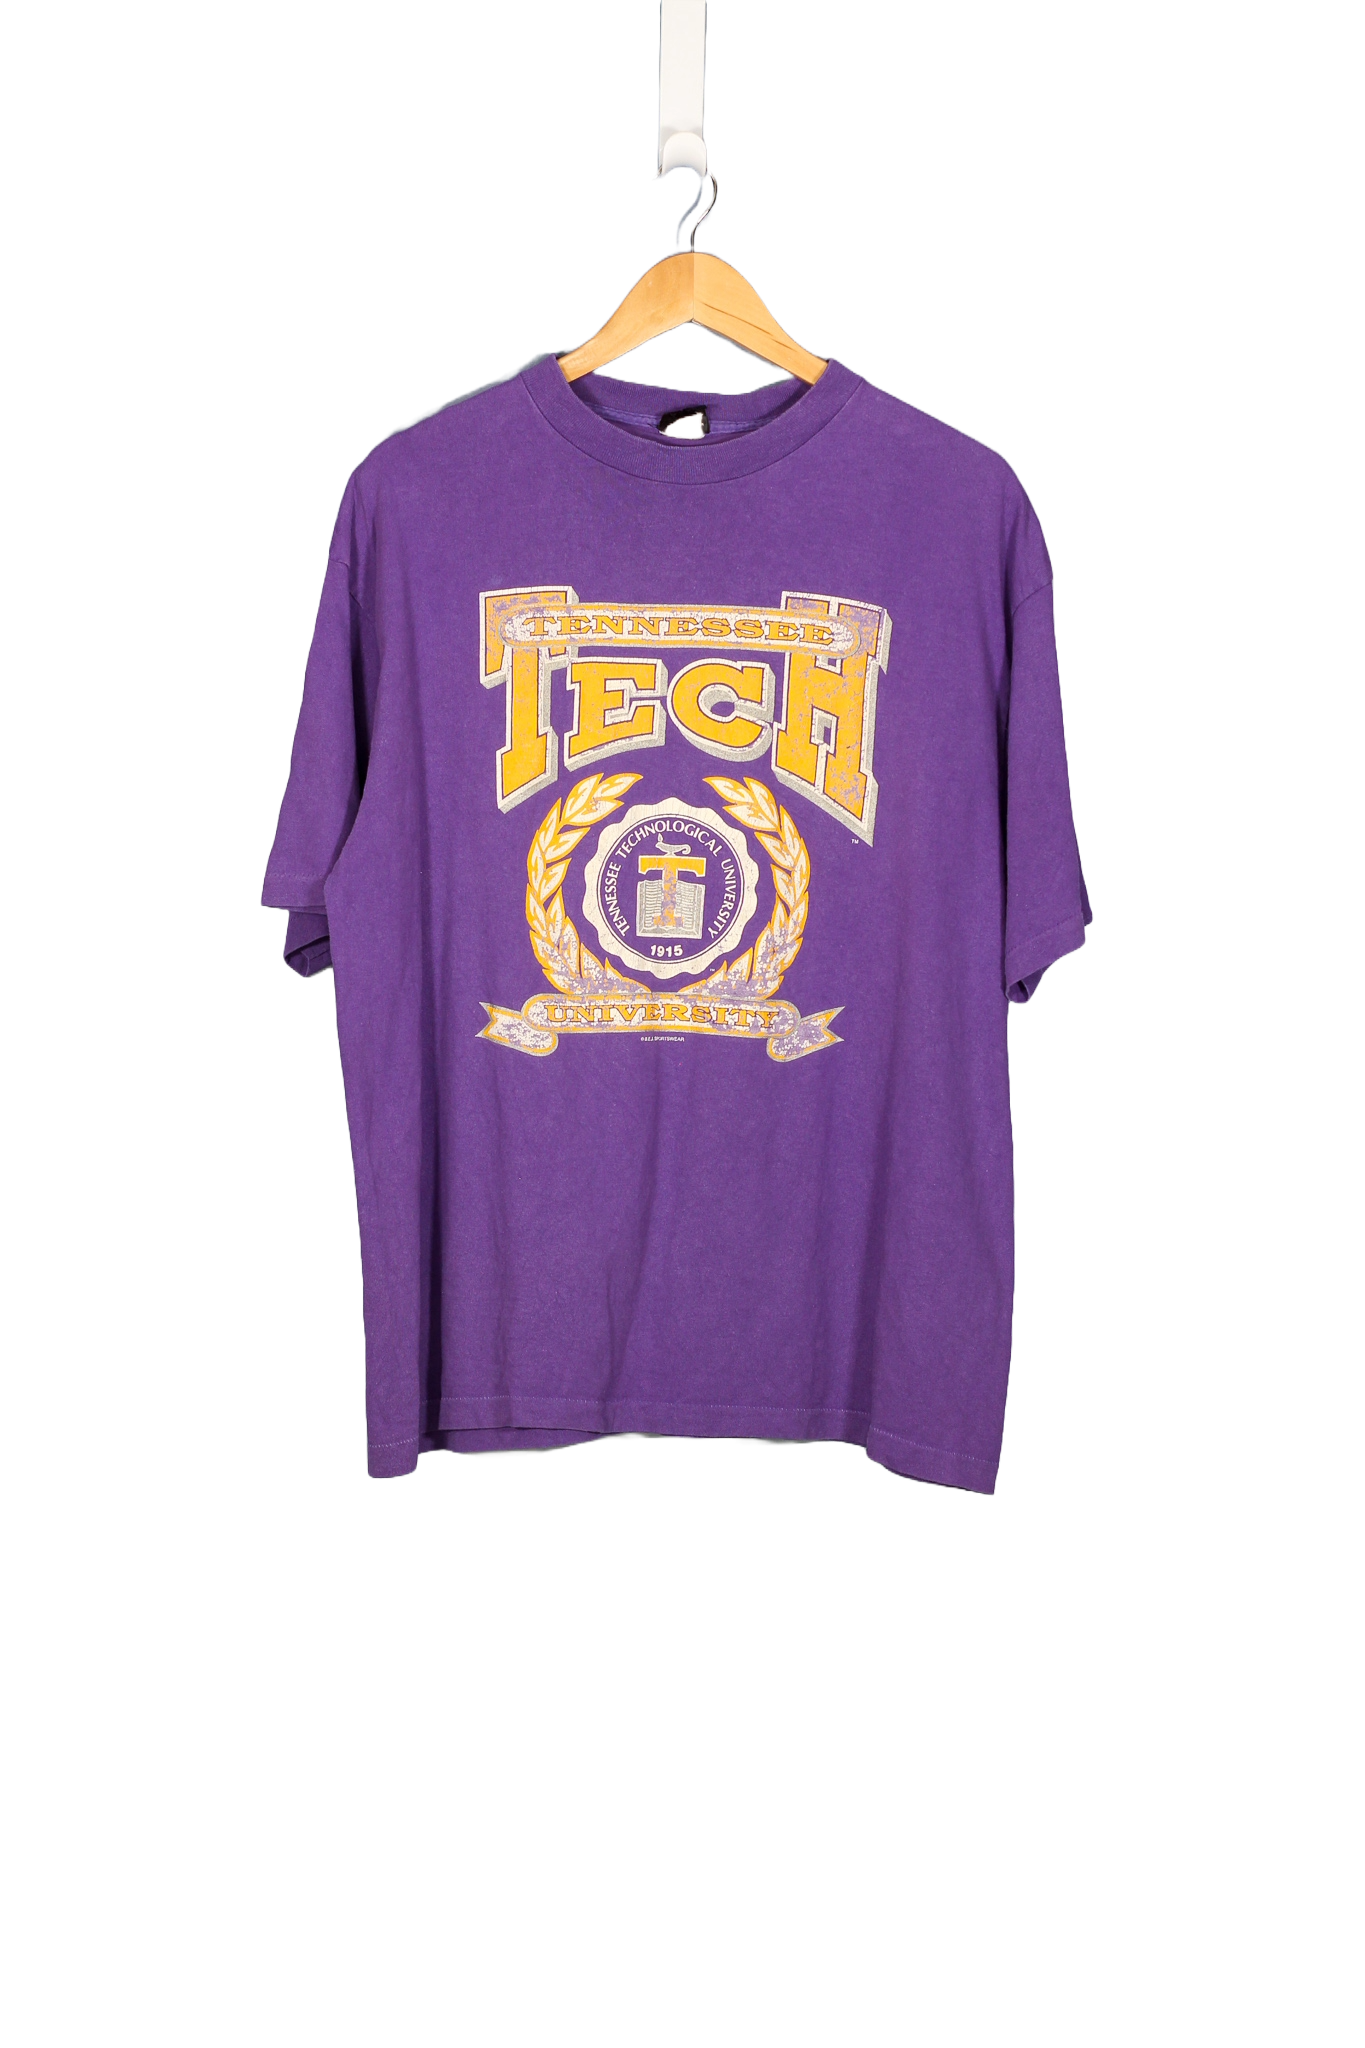 Vintage Tennessee Tech College T-Shirt - L